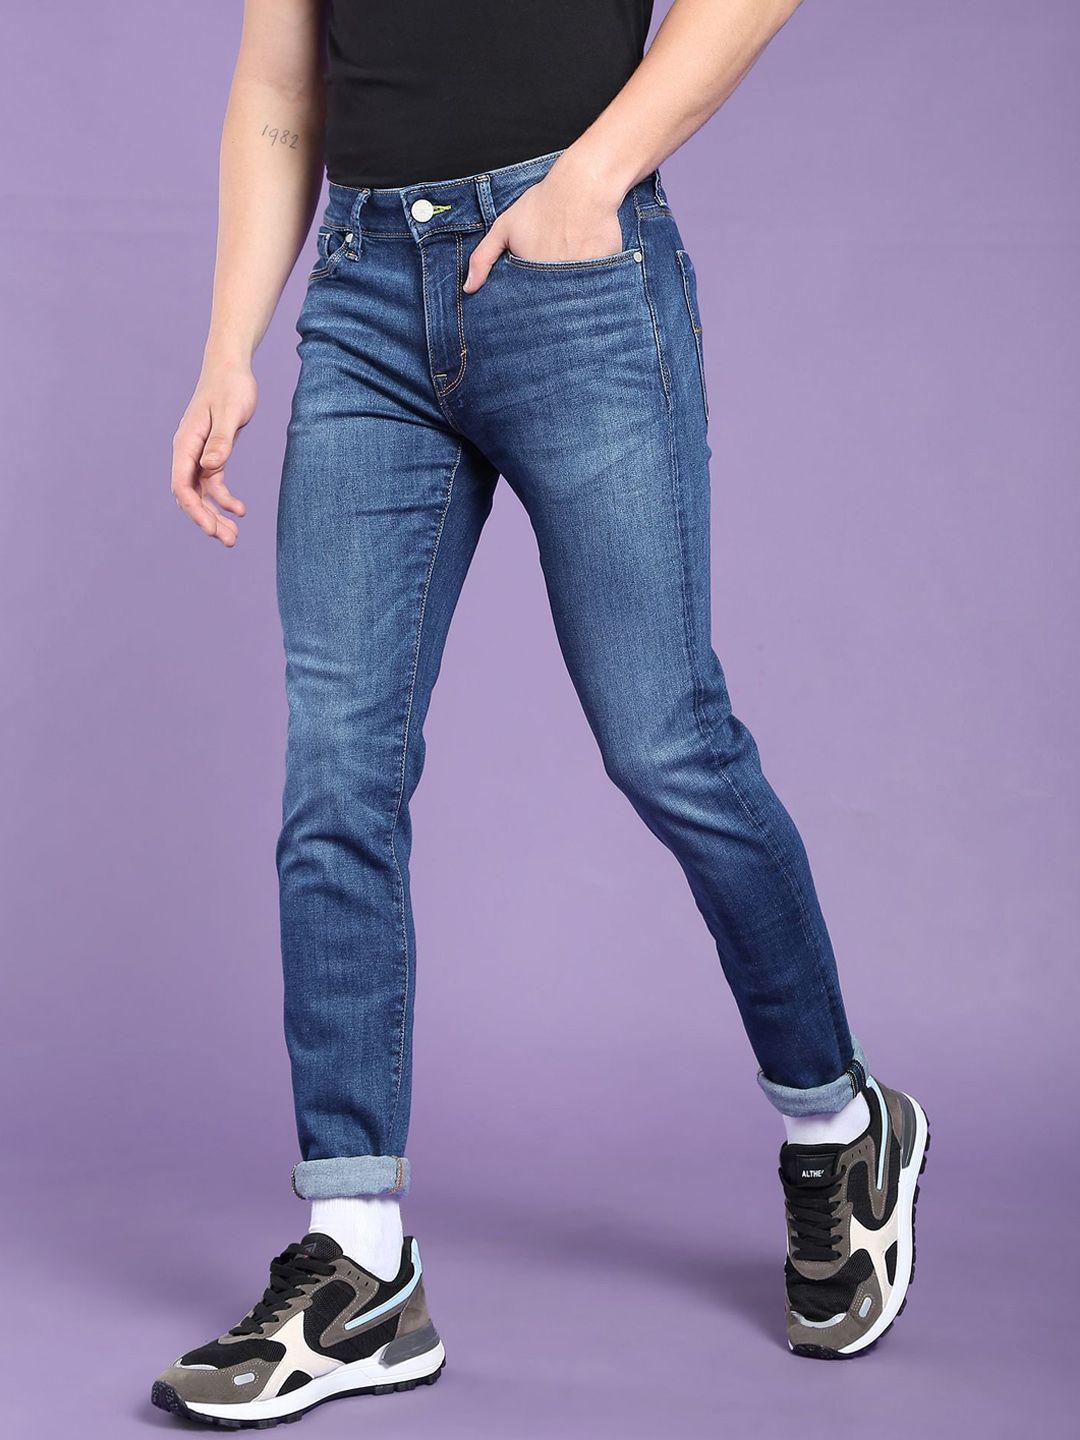 flying machine low rise jackson skinny fit f-lite jeans